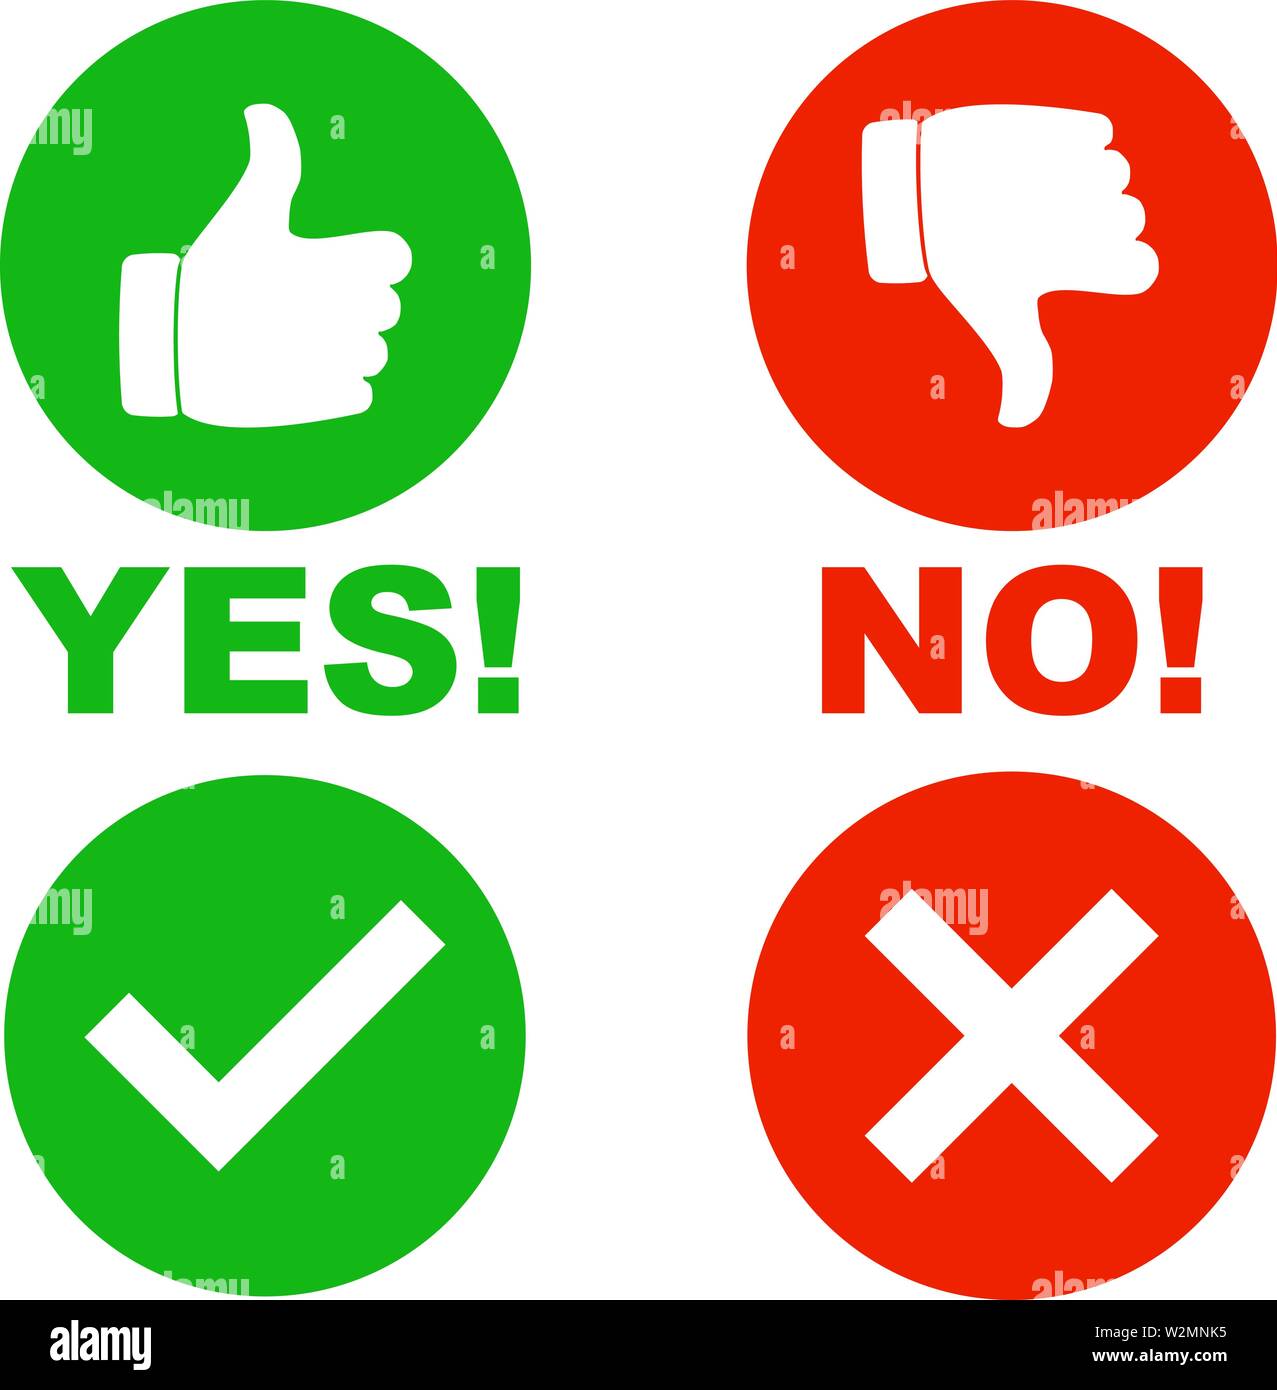 Top 92+ Pictures Symbol For Yes And No Full HD, 2k, 4k